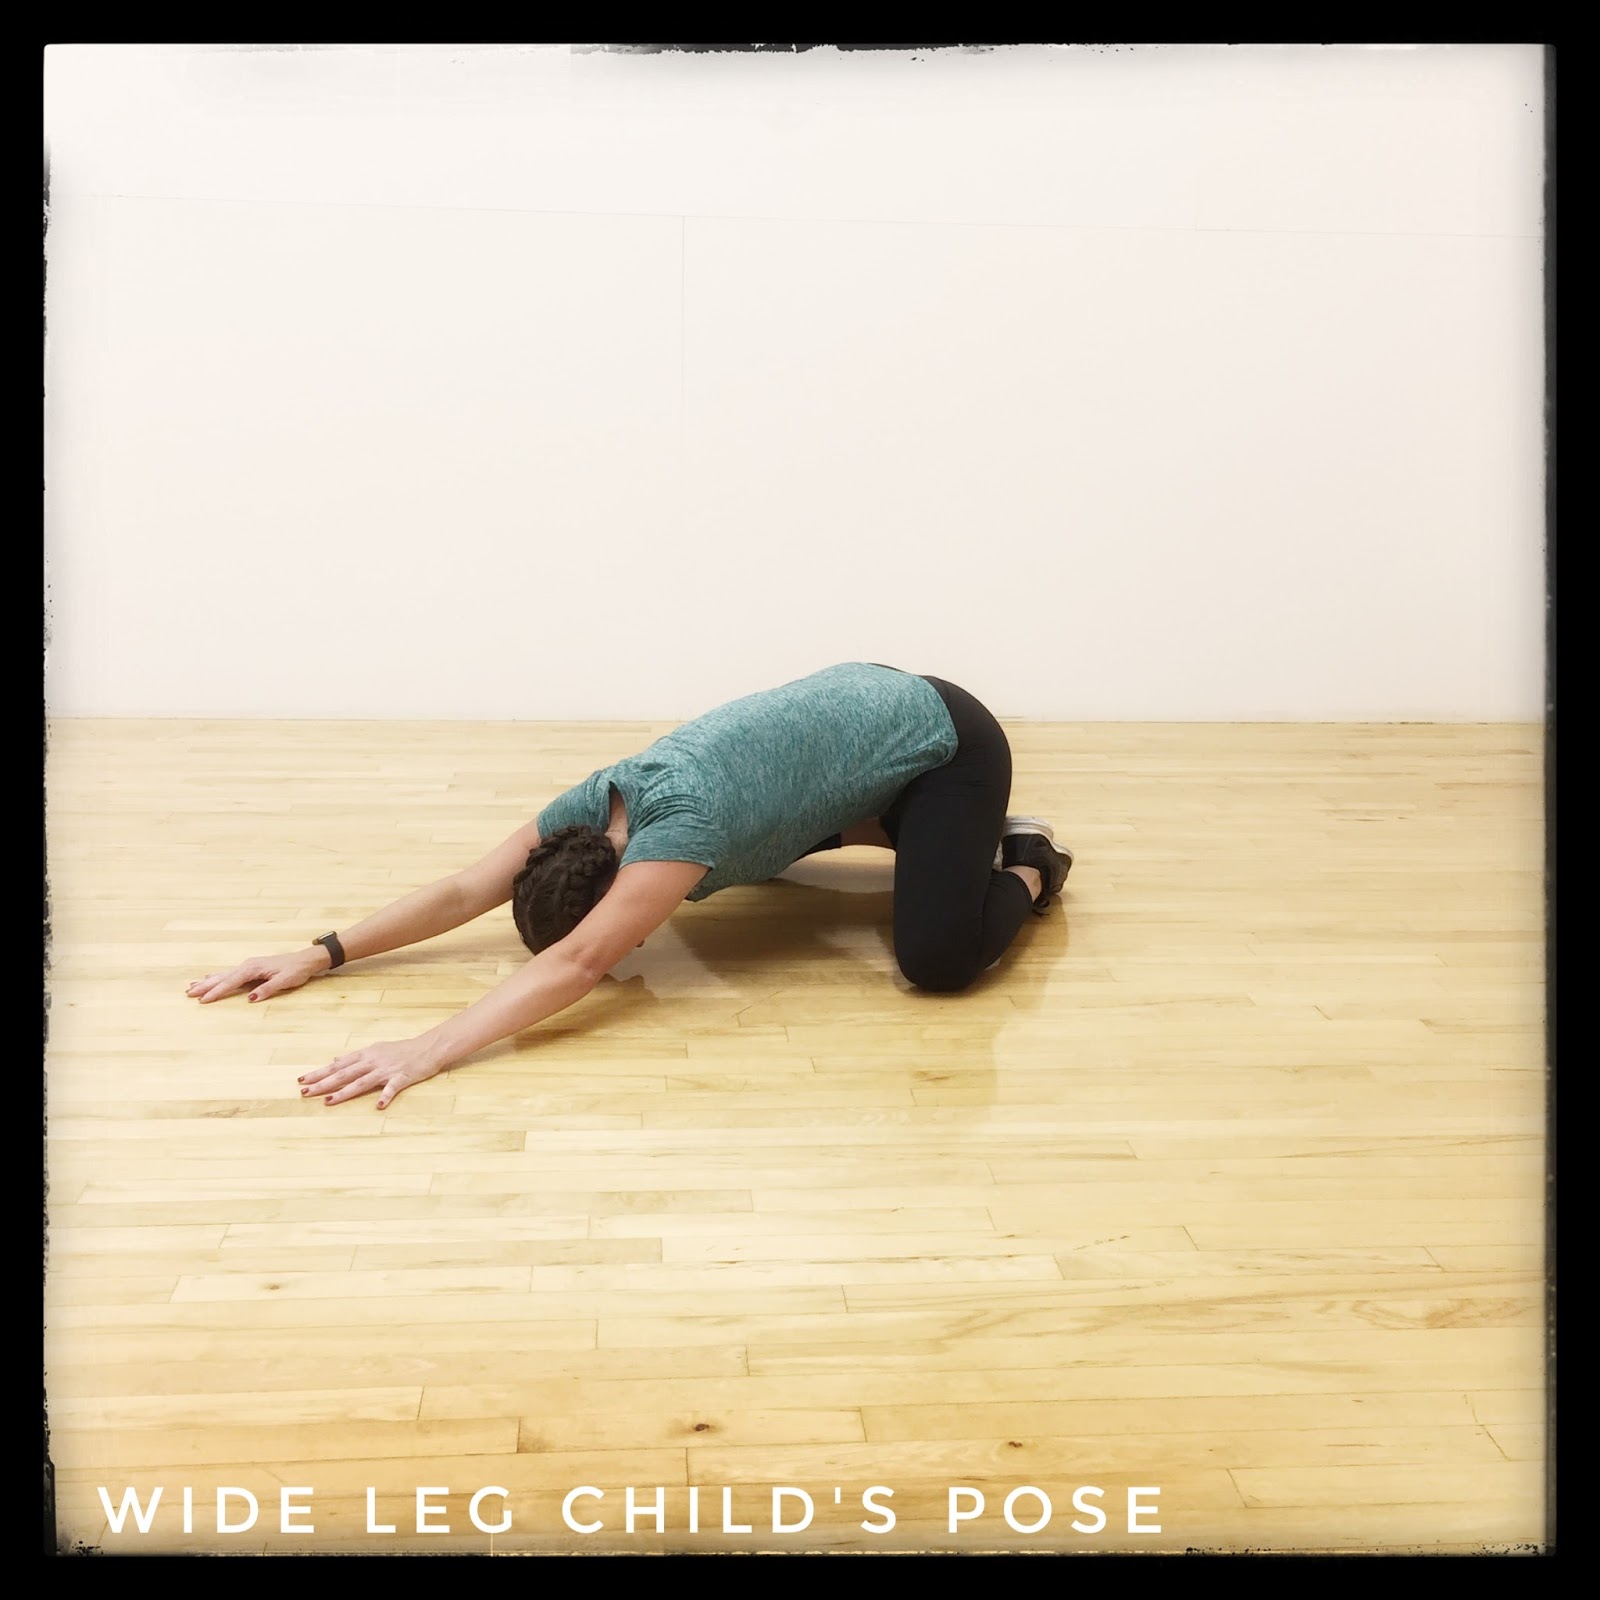 Sole Shaping: The Importance of Child's Pose